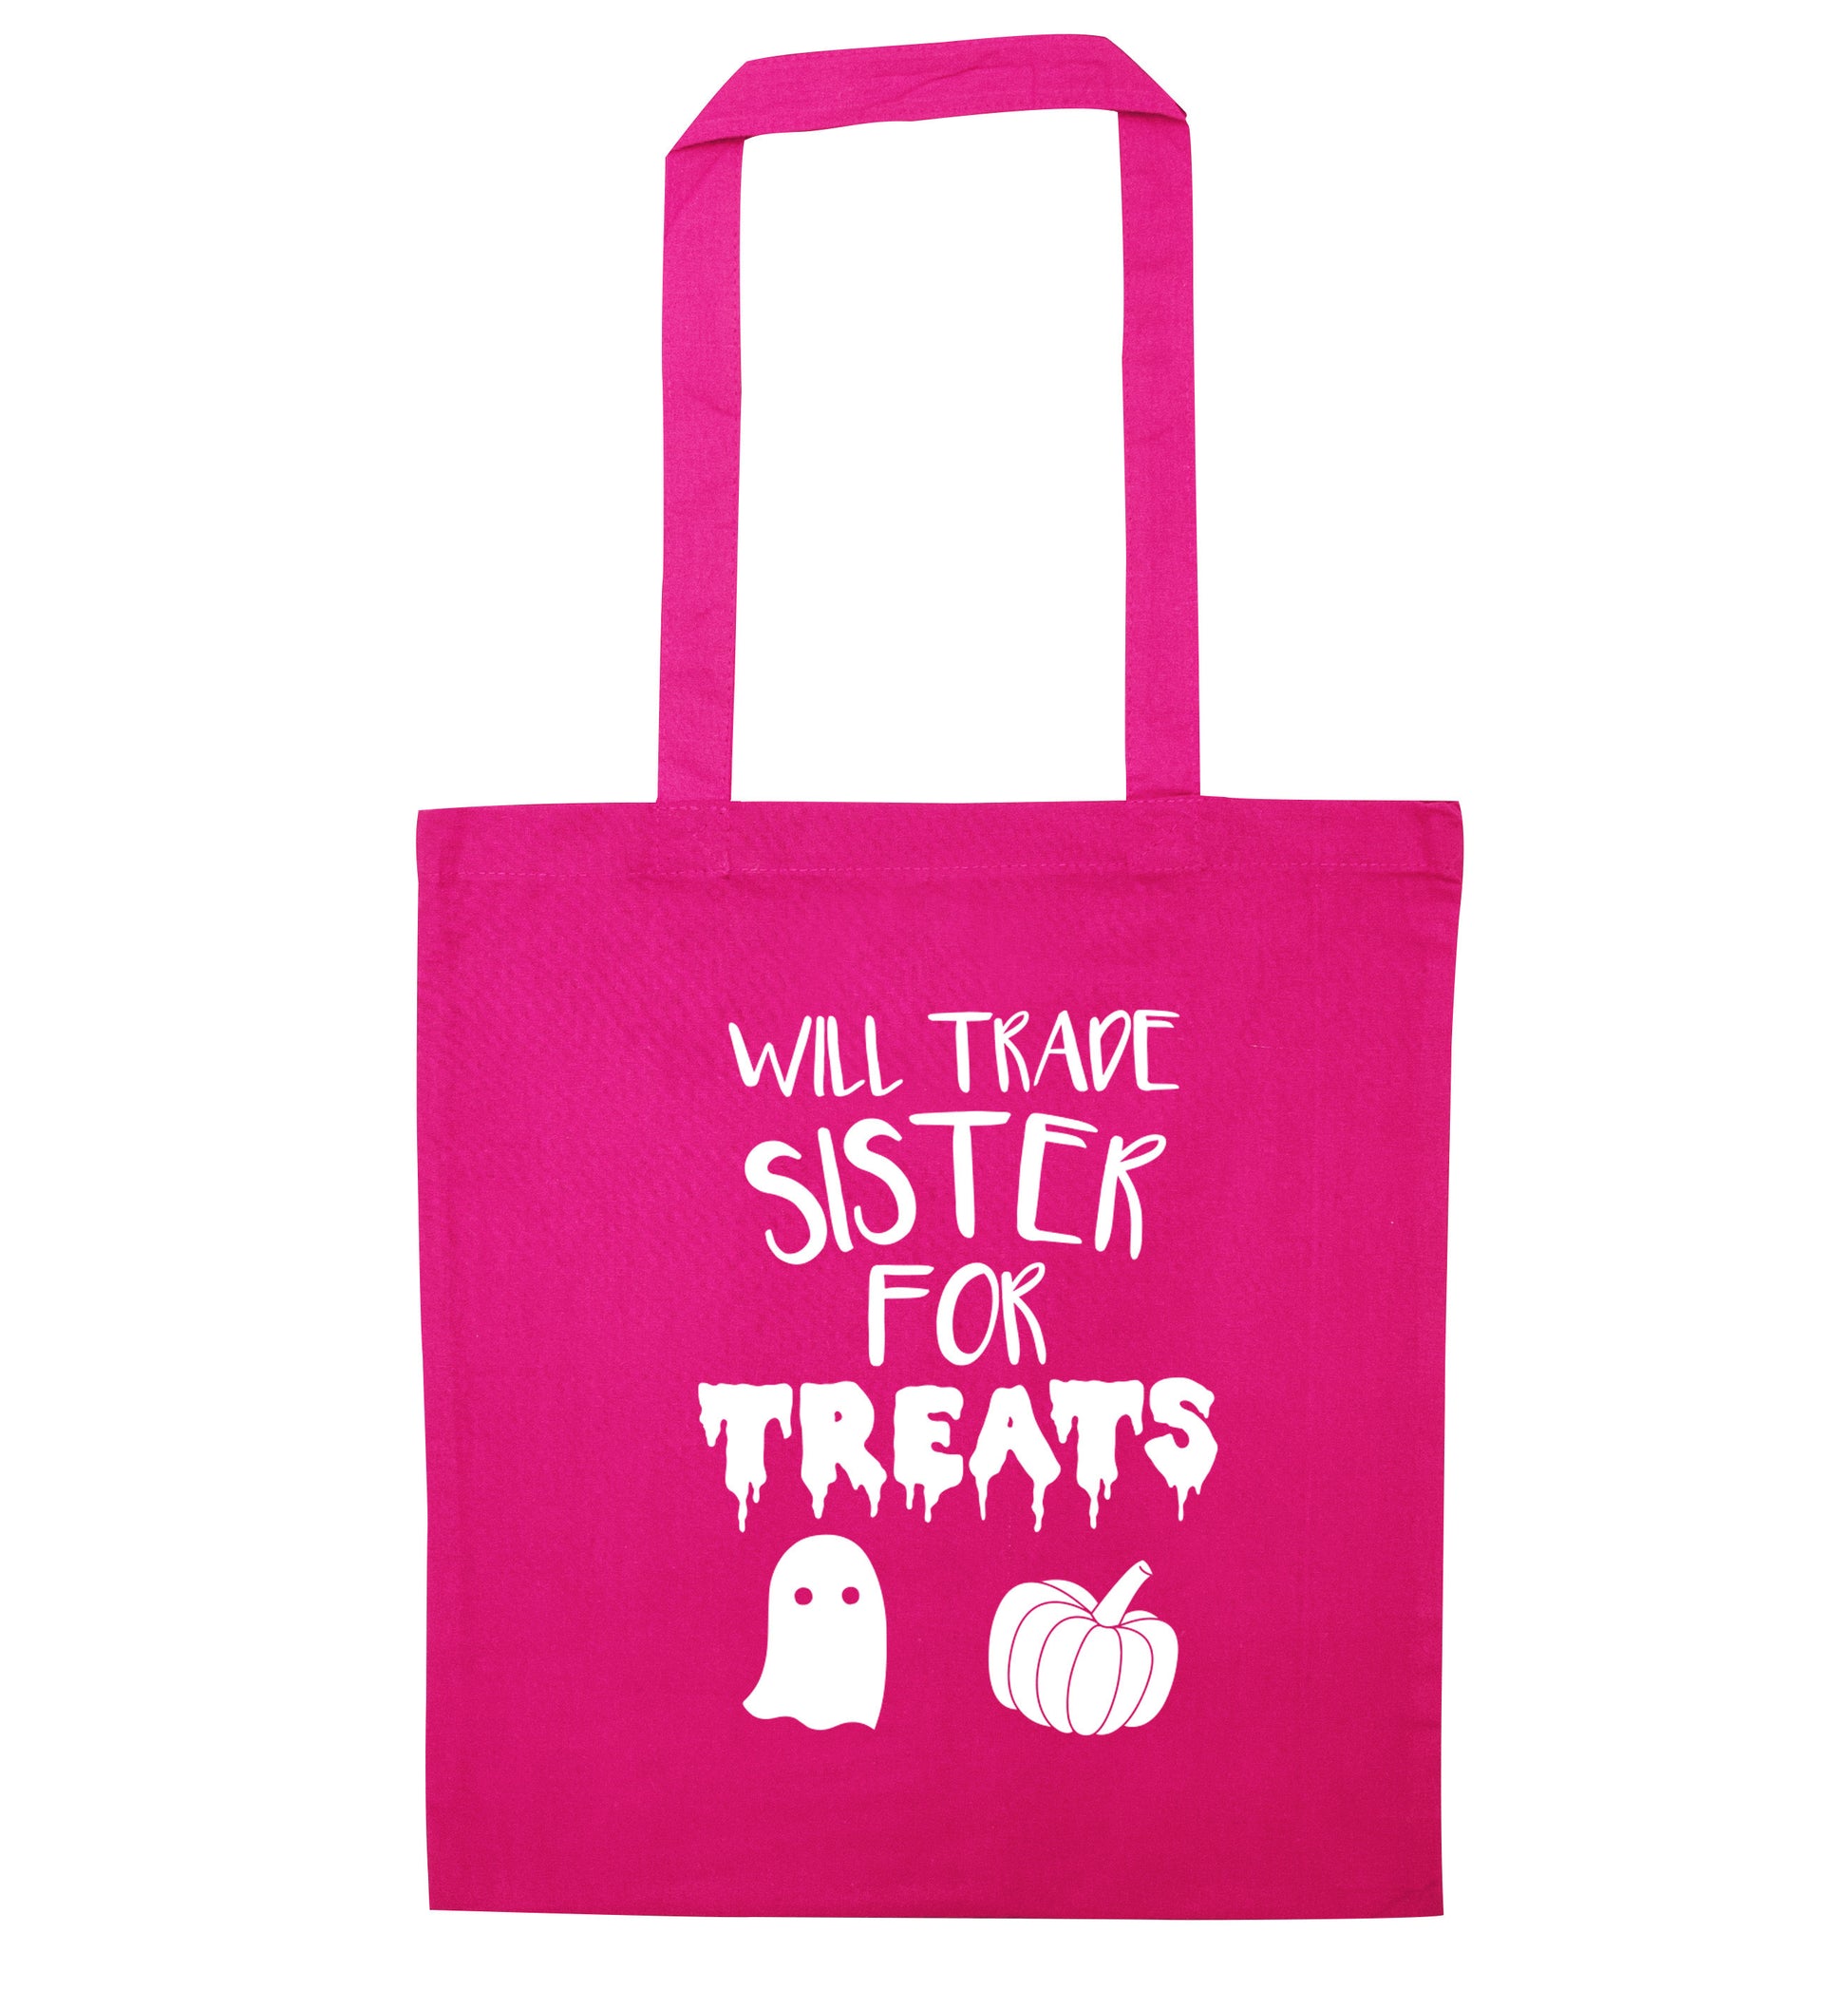 Will trade sister for treats pink tote bag